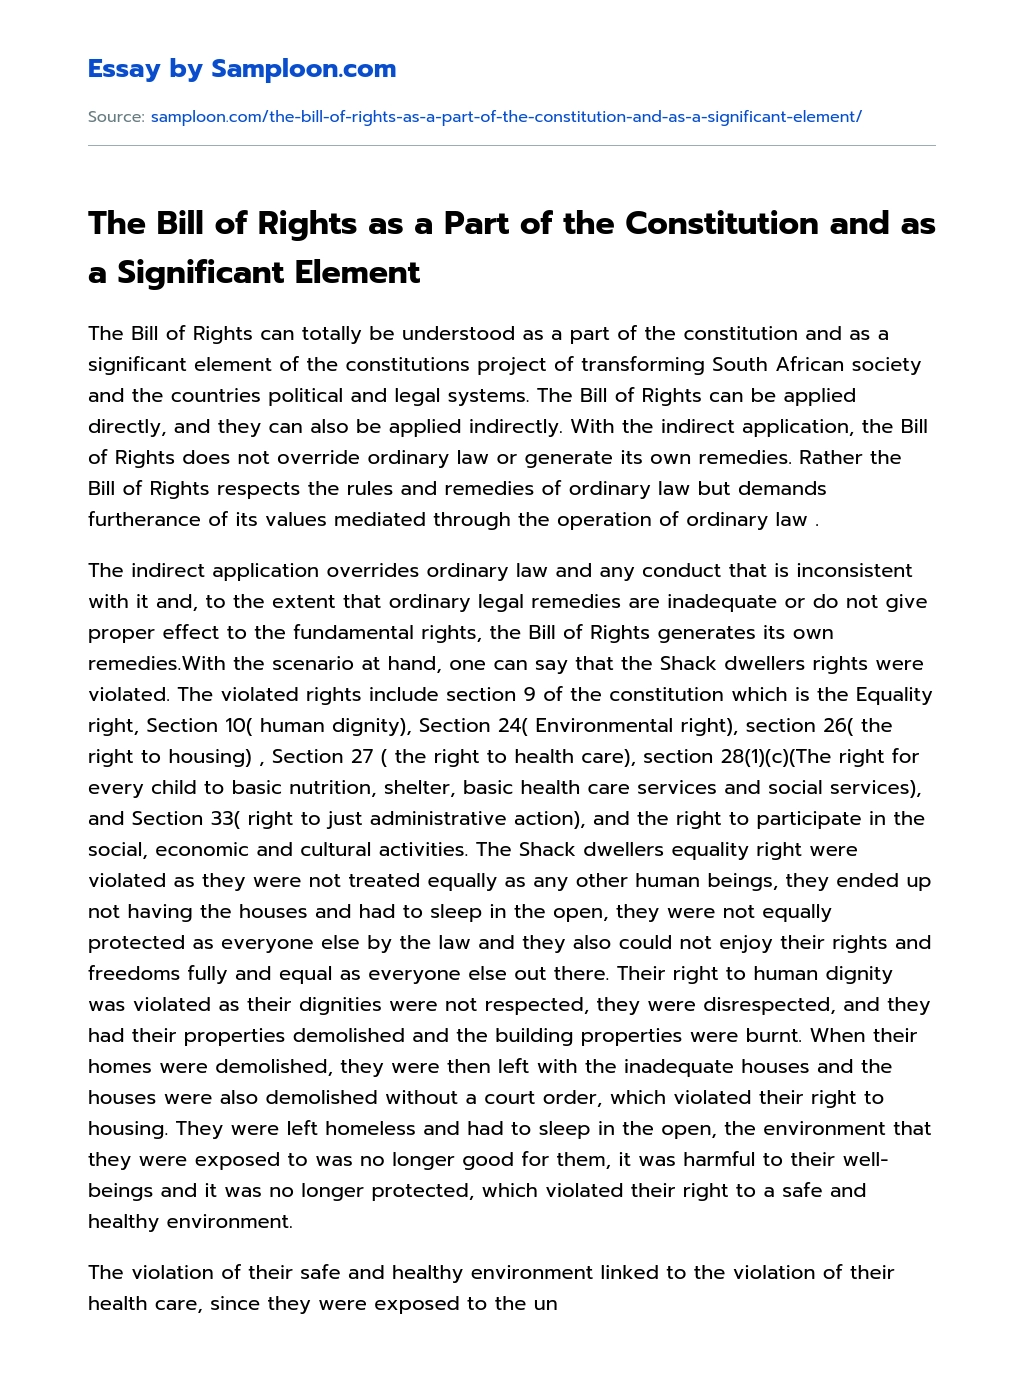 The Bill of Rights as a Part of the Constitution and as a Significant Element essay